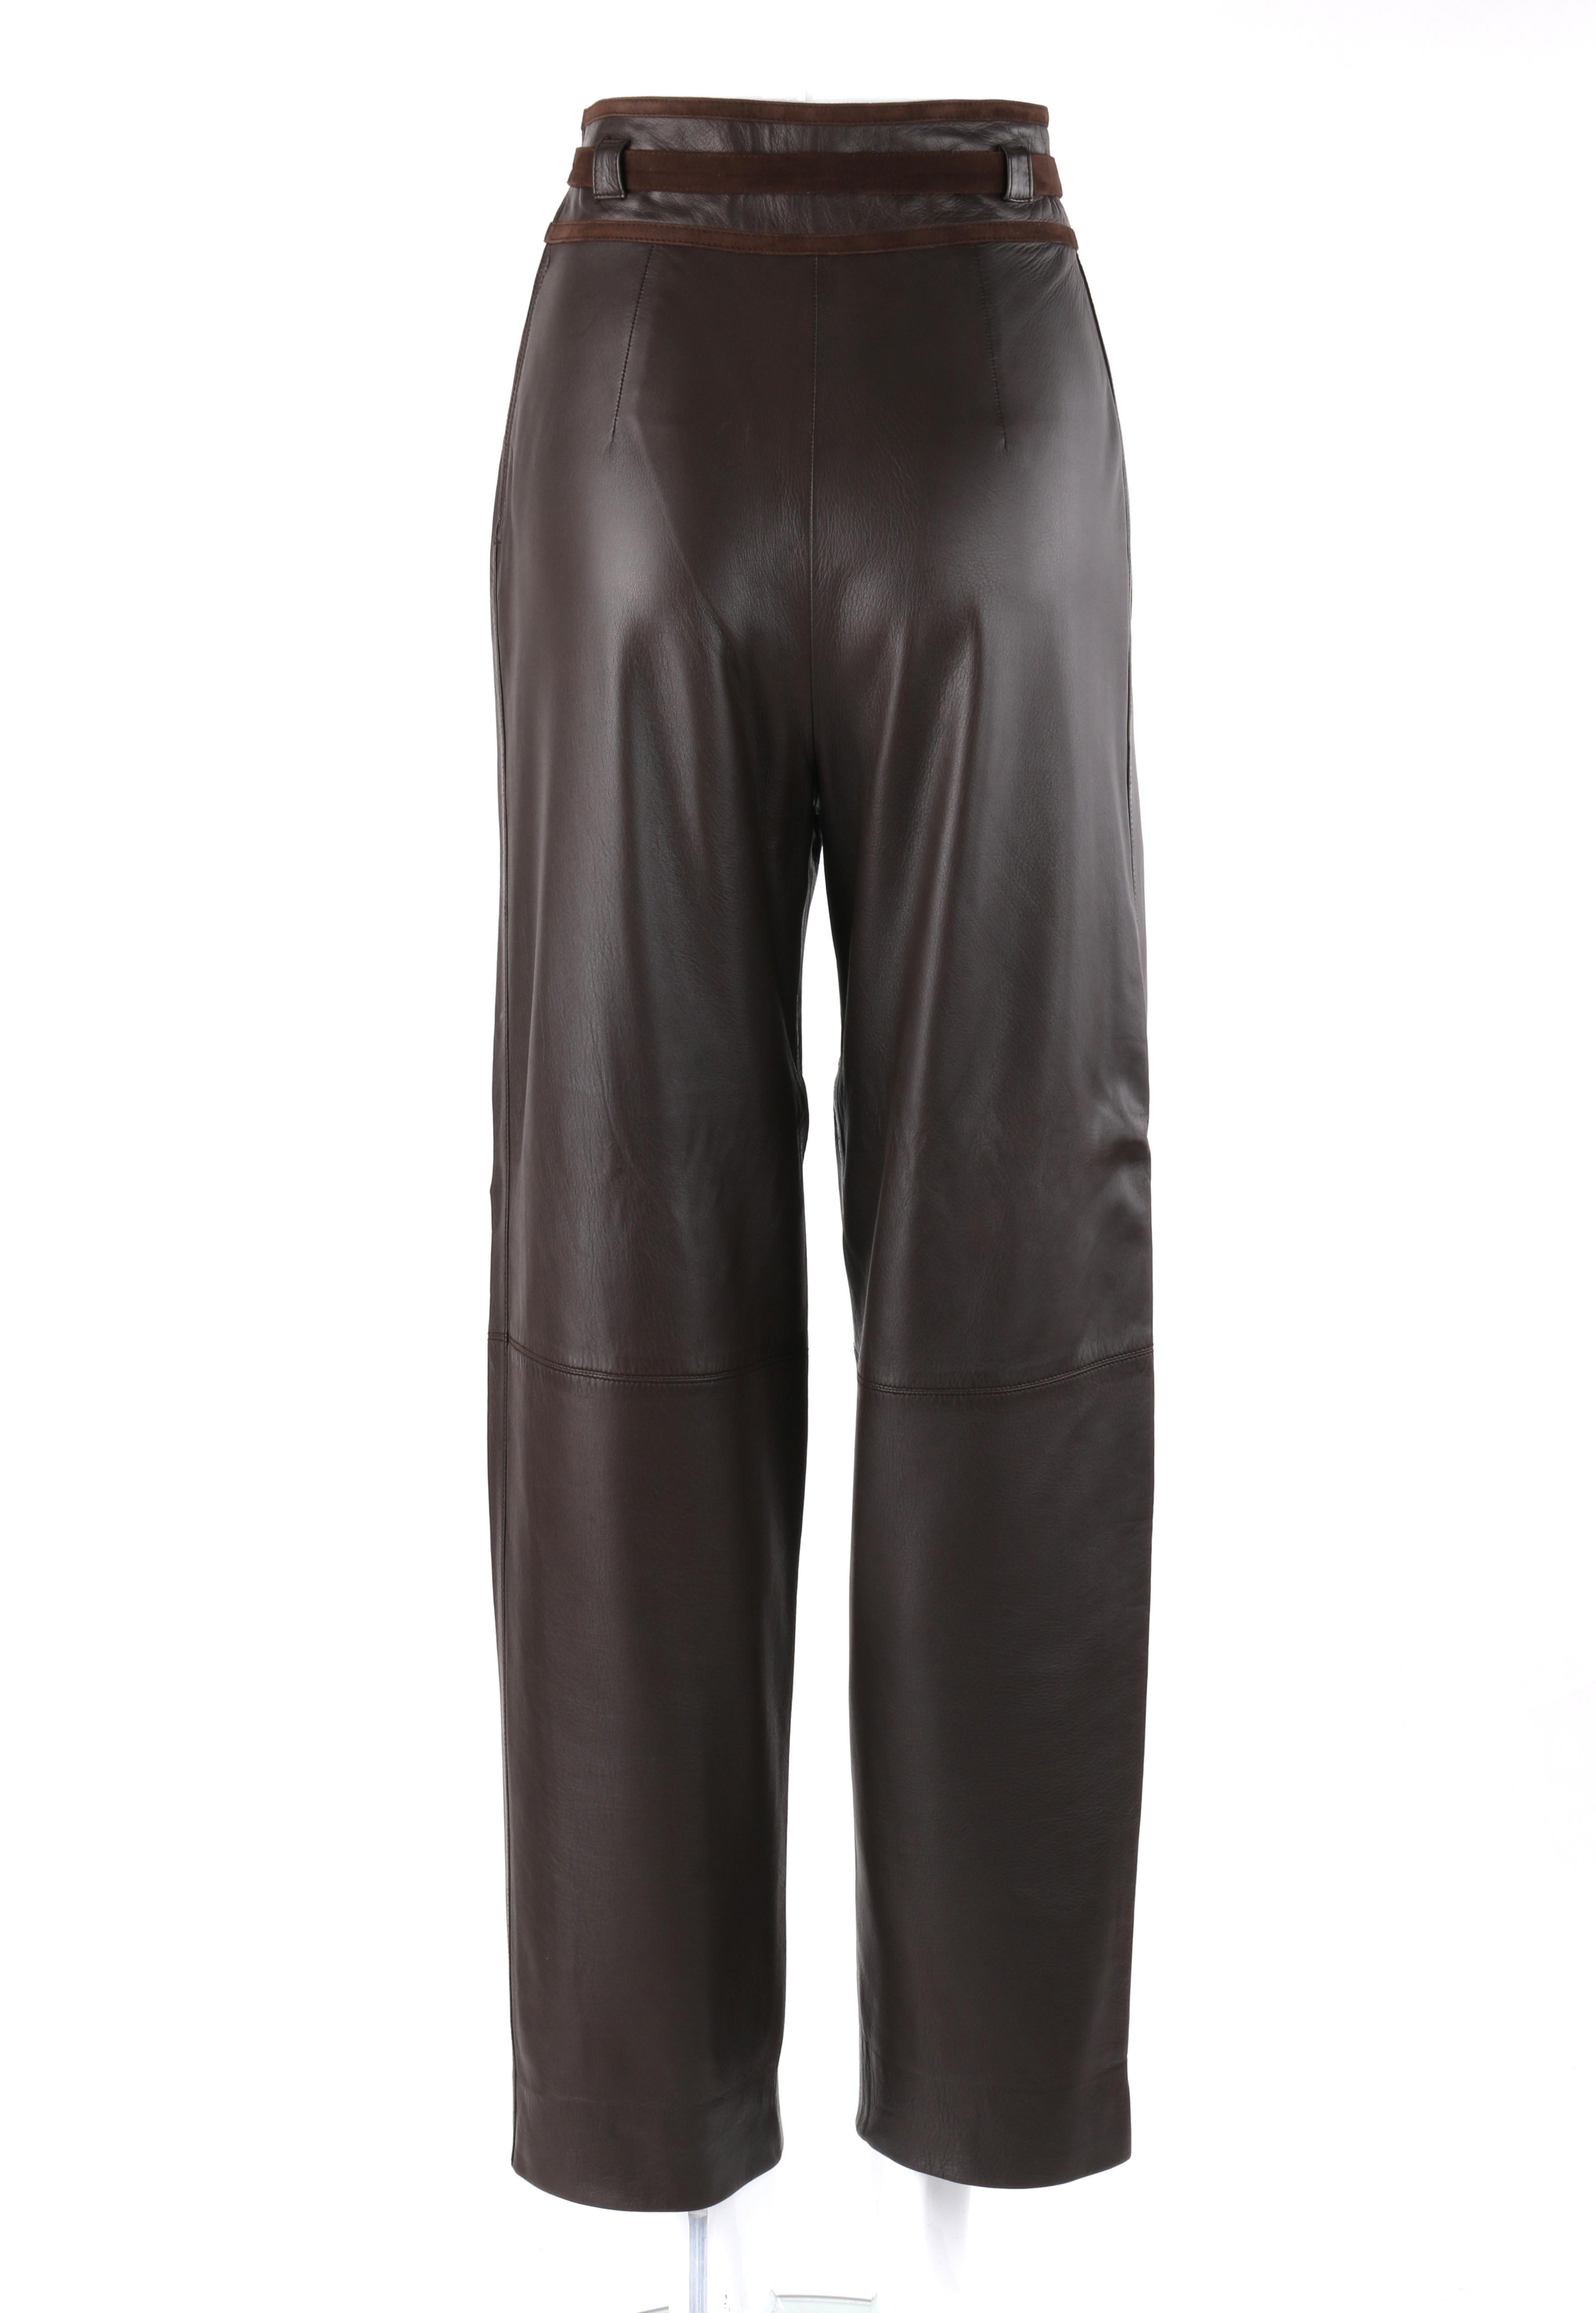 GUCCI c.1970’s Dark Brown Leather High Waisted Tapered Trouser Pants ...